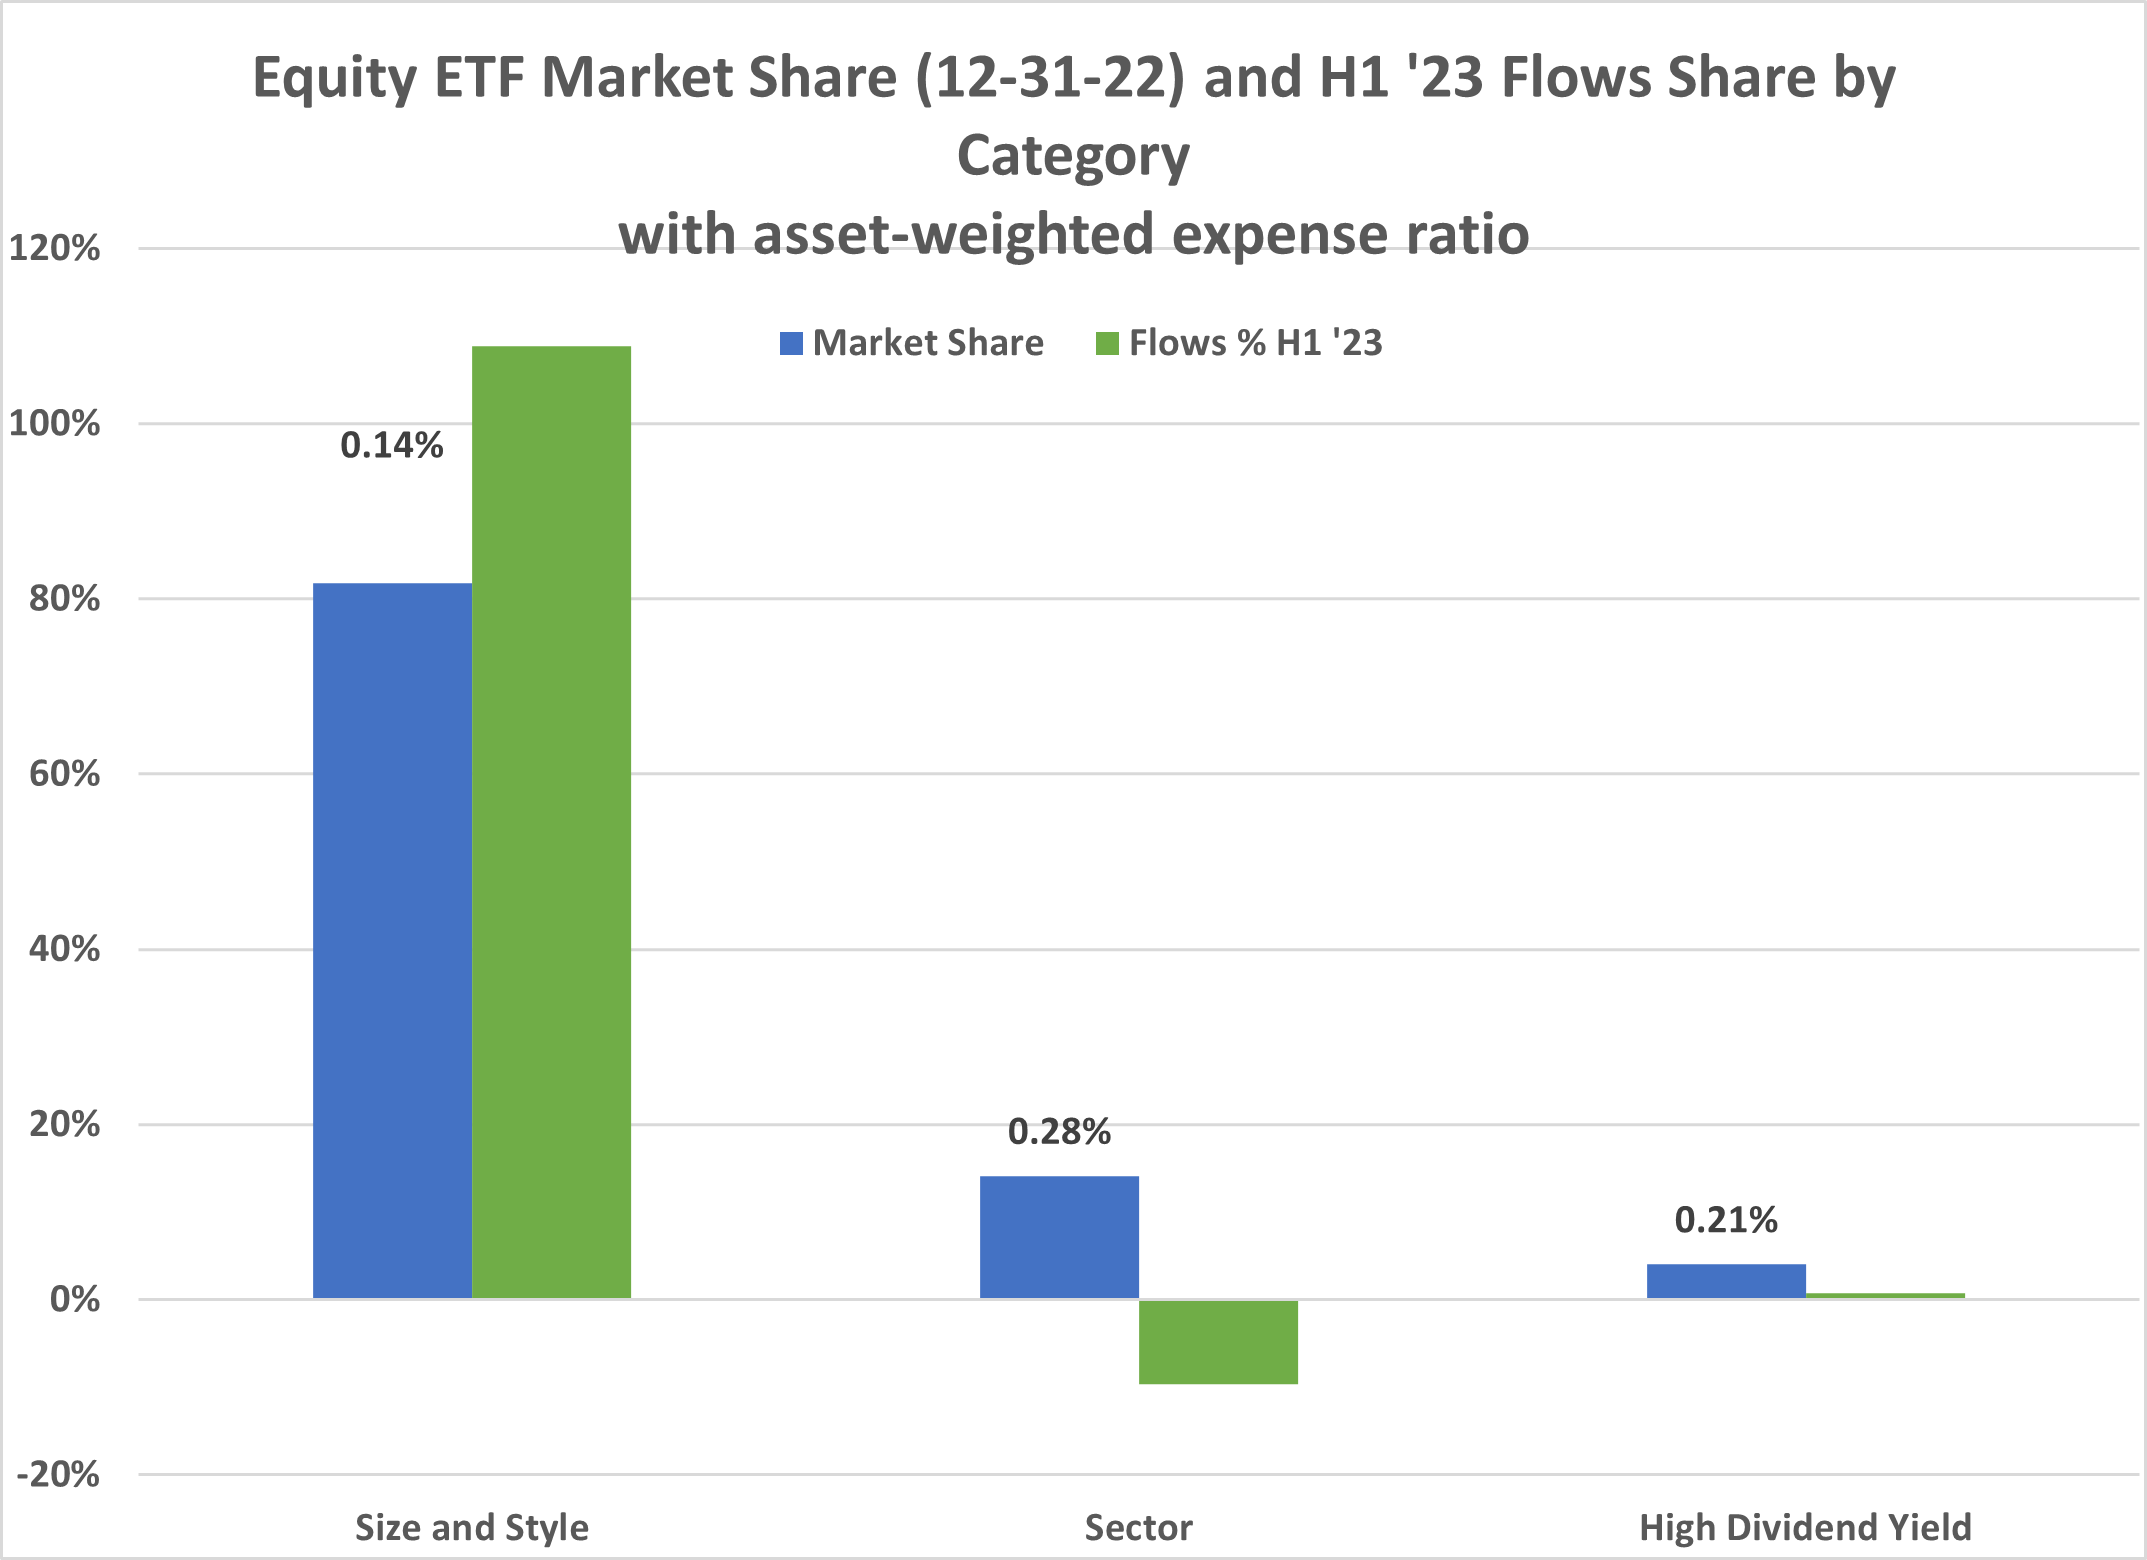 07-equity-etf-market-share-december-31-2022-and-h1-2023-flows-share-by-category-with-asset-weighted-expense-ratio